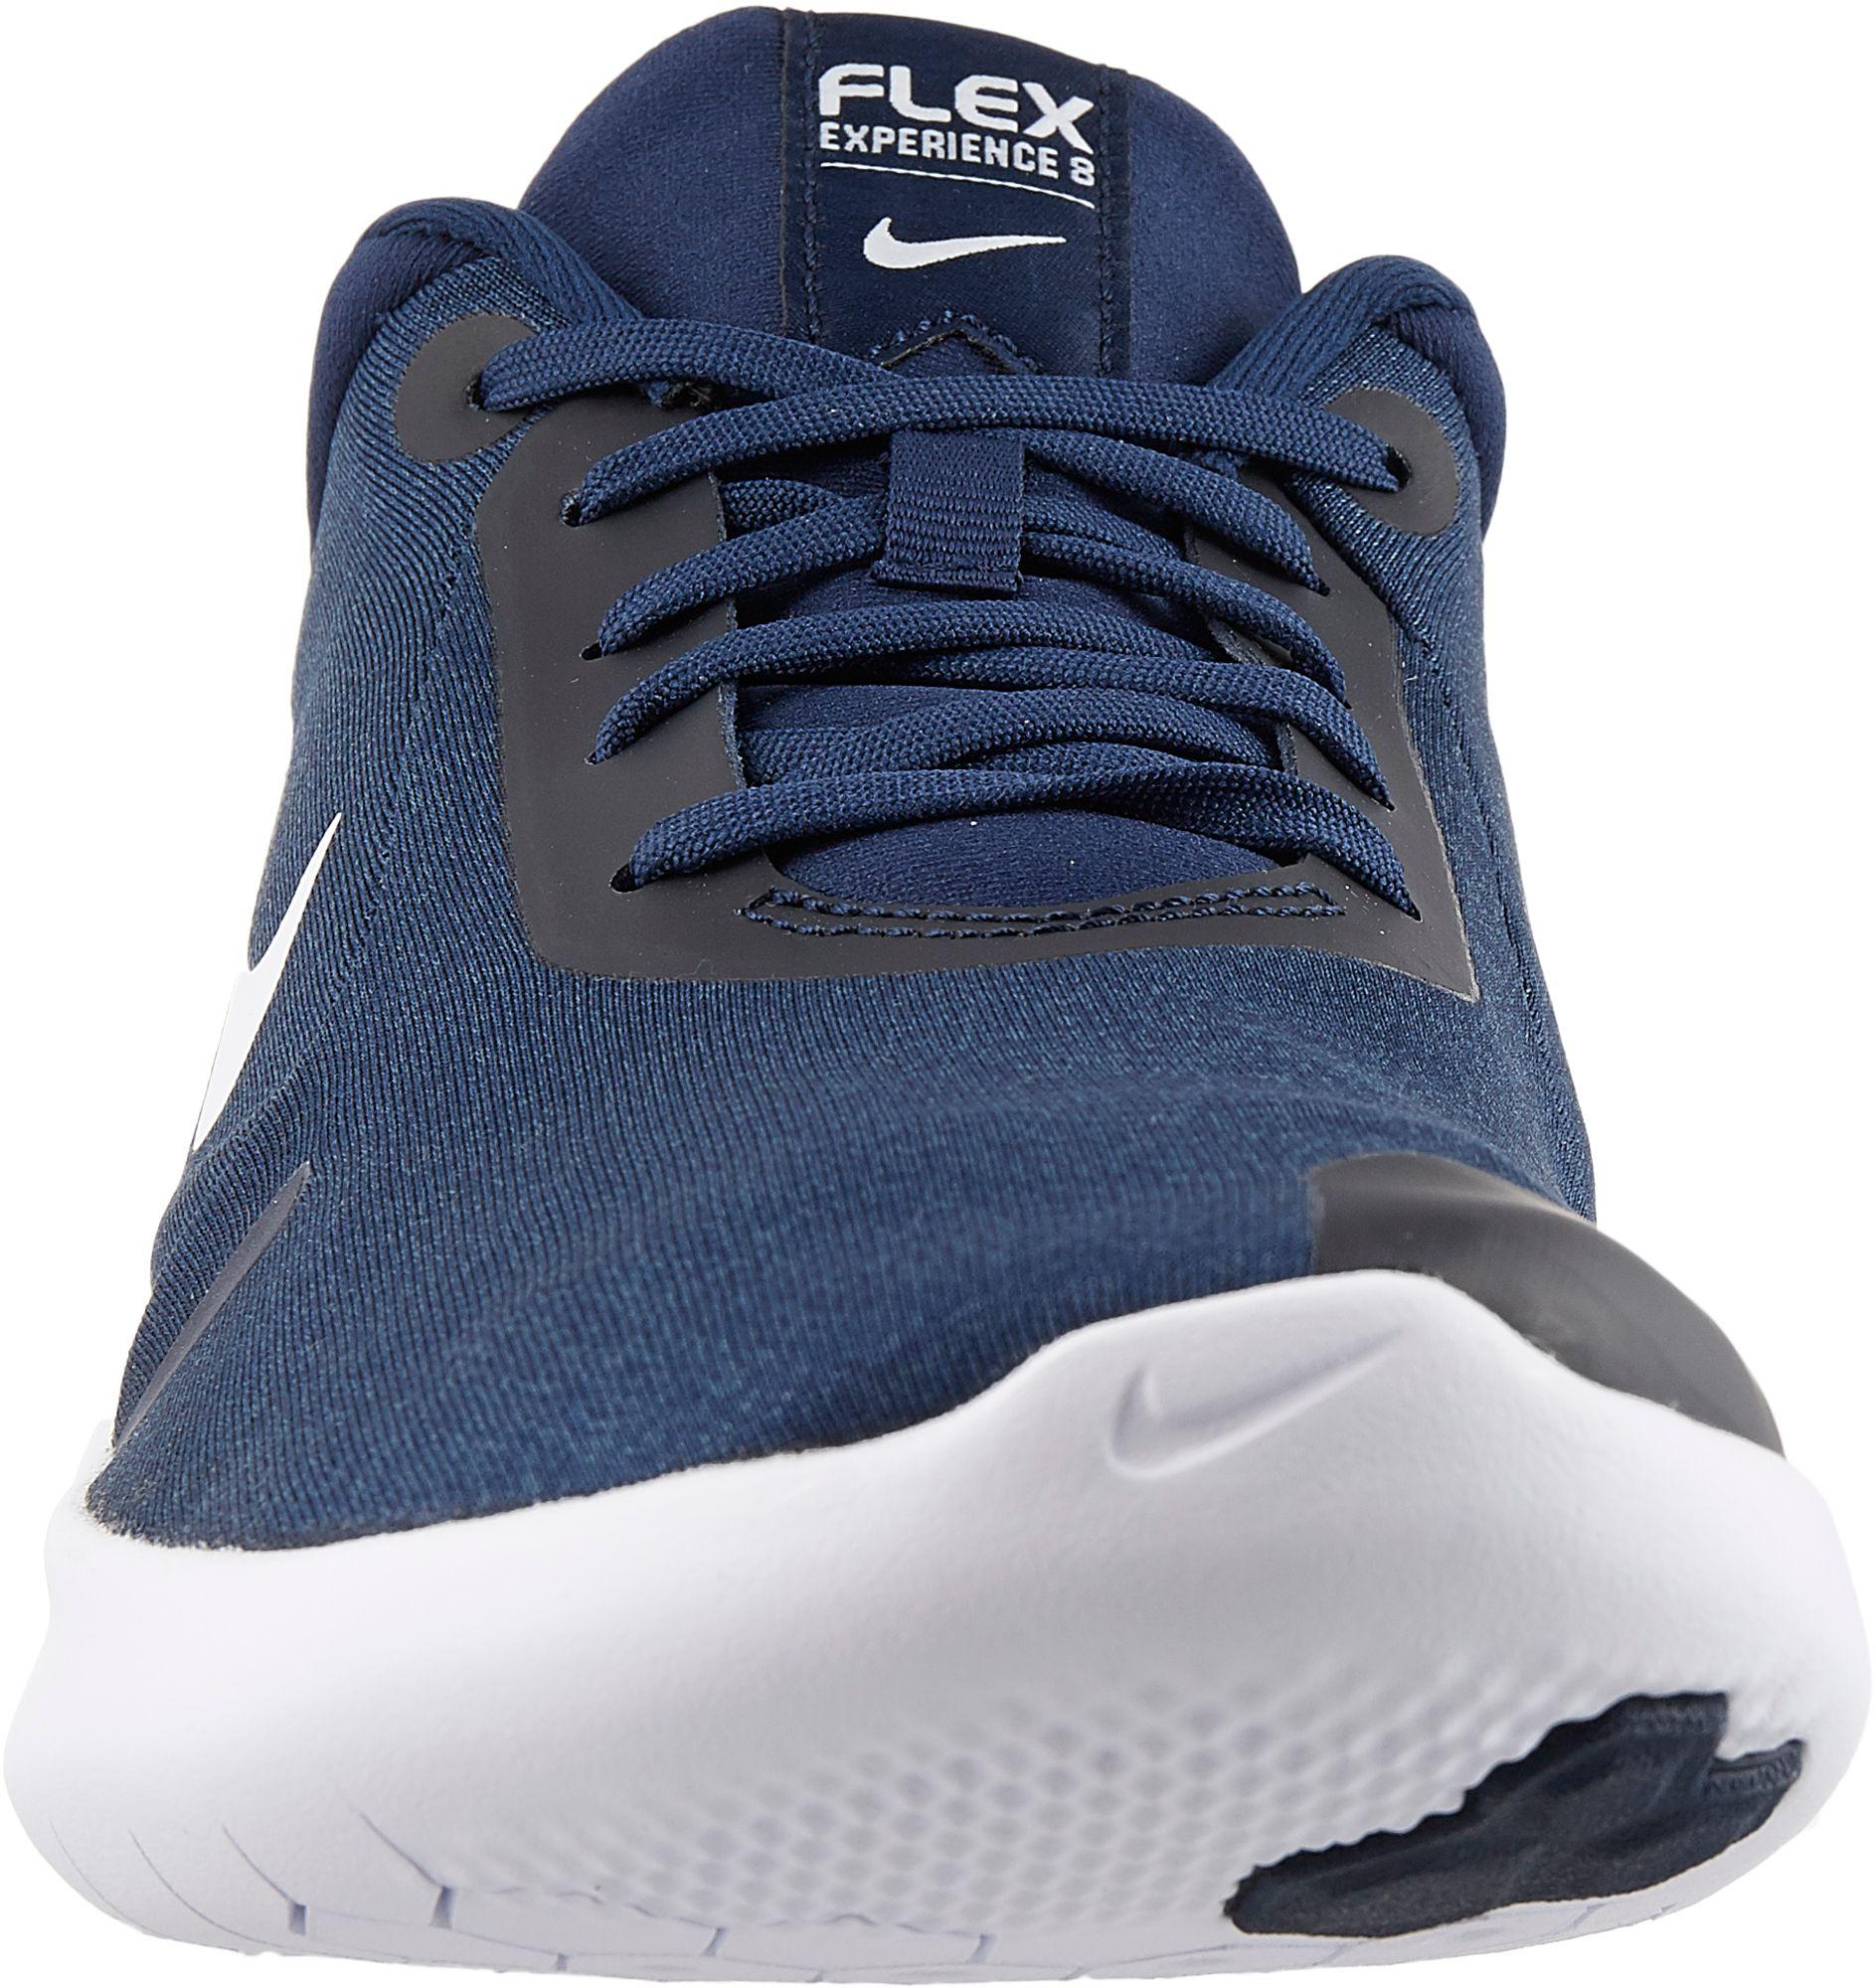 Nike Synthetic Flex Experience Rn 8 Running Shoes in Navy/White (Blue ...